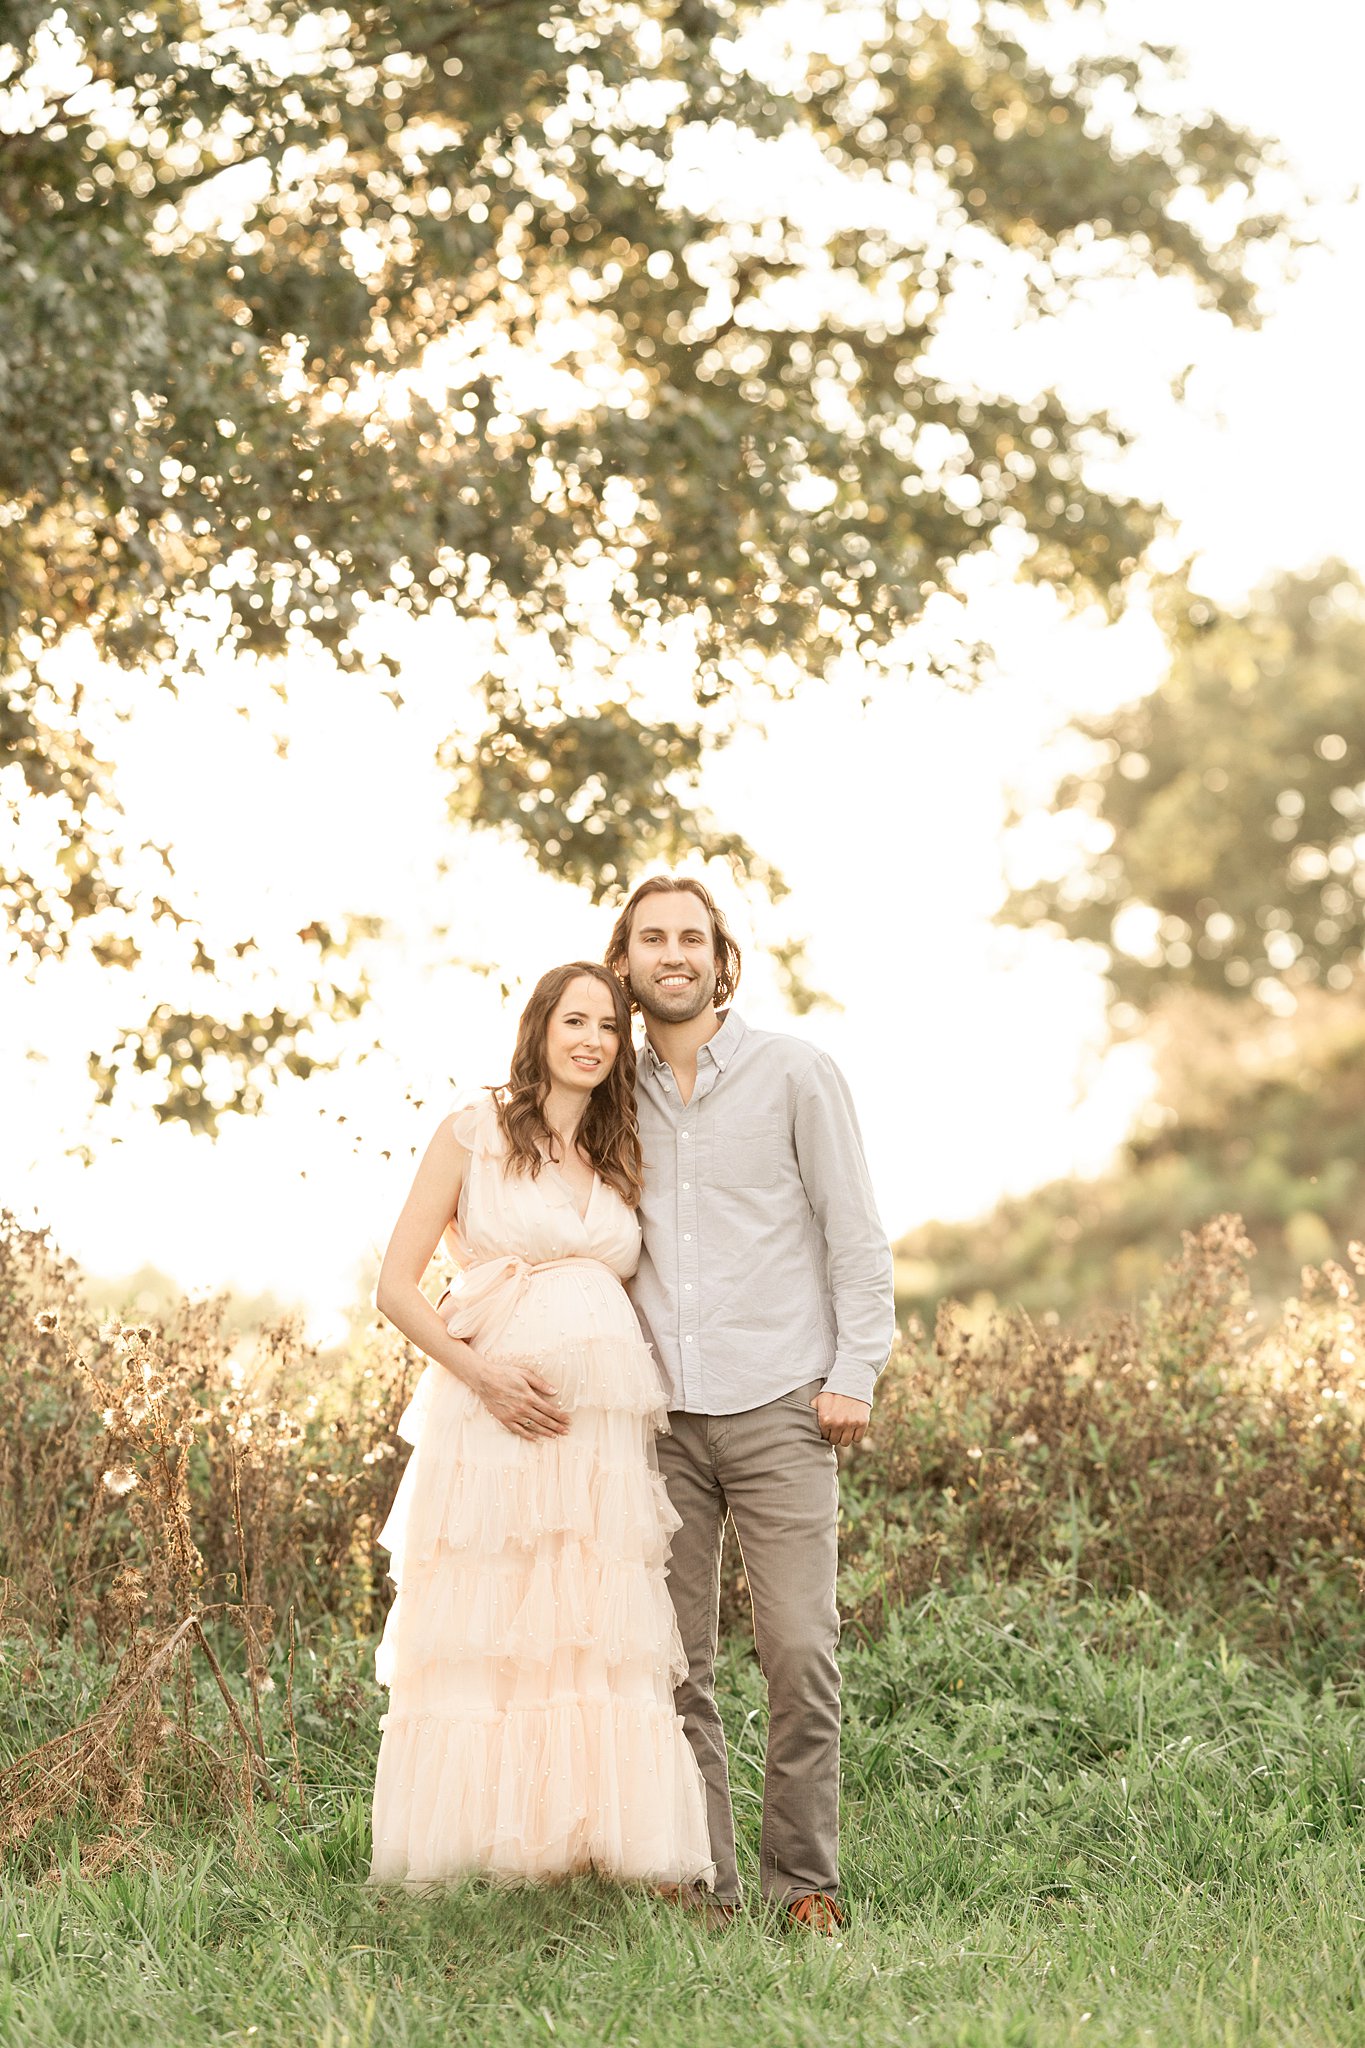 A mom to be in a white maternity gown leans into her partner as they stand in a field of grass